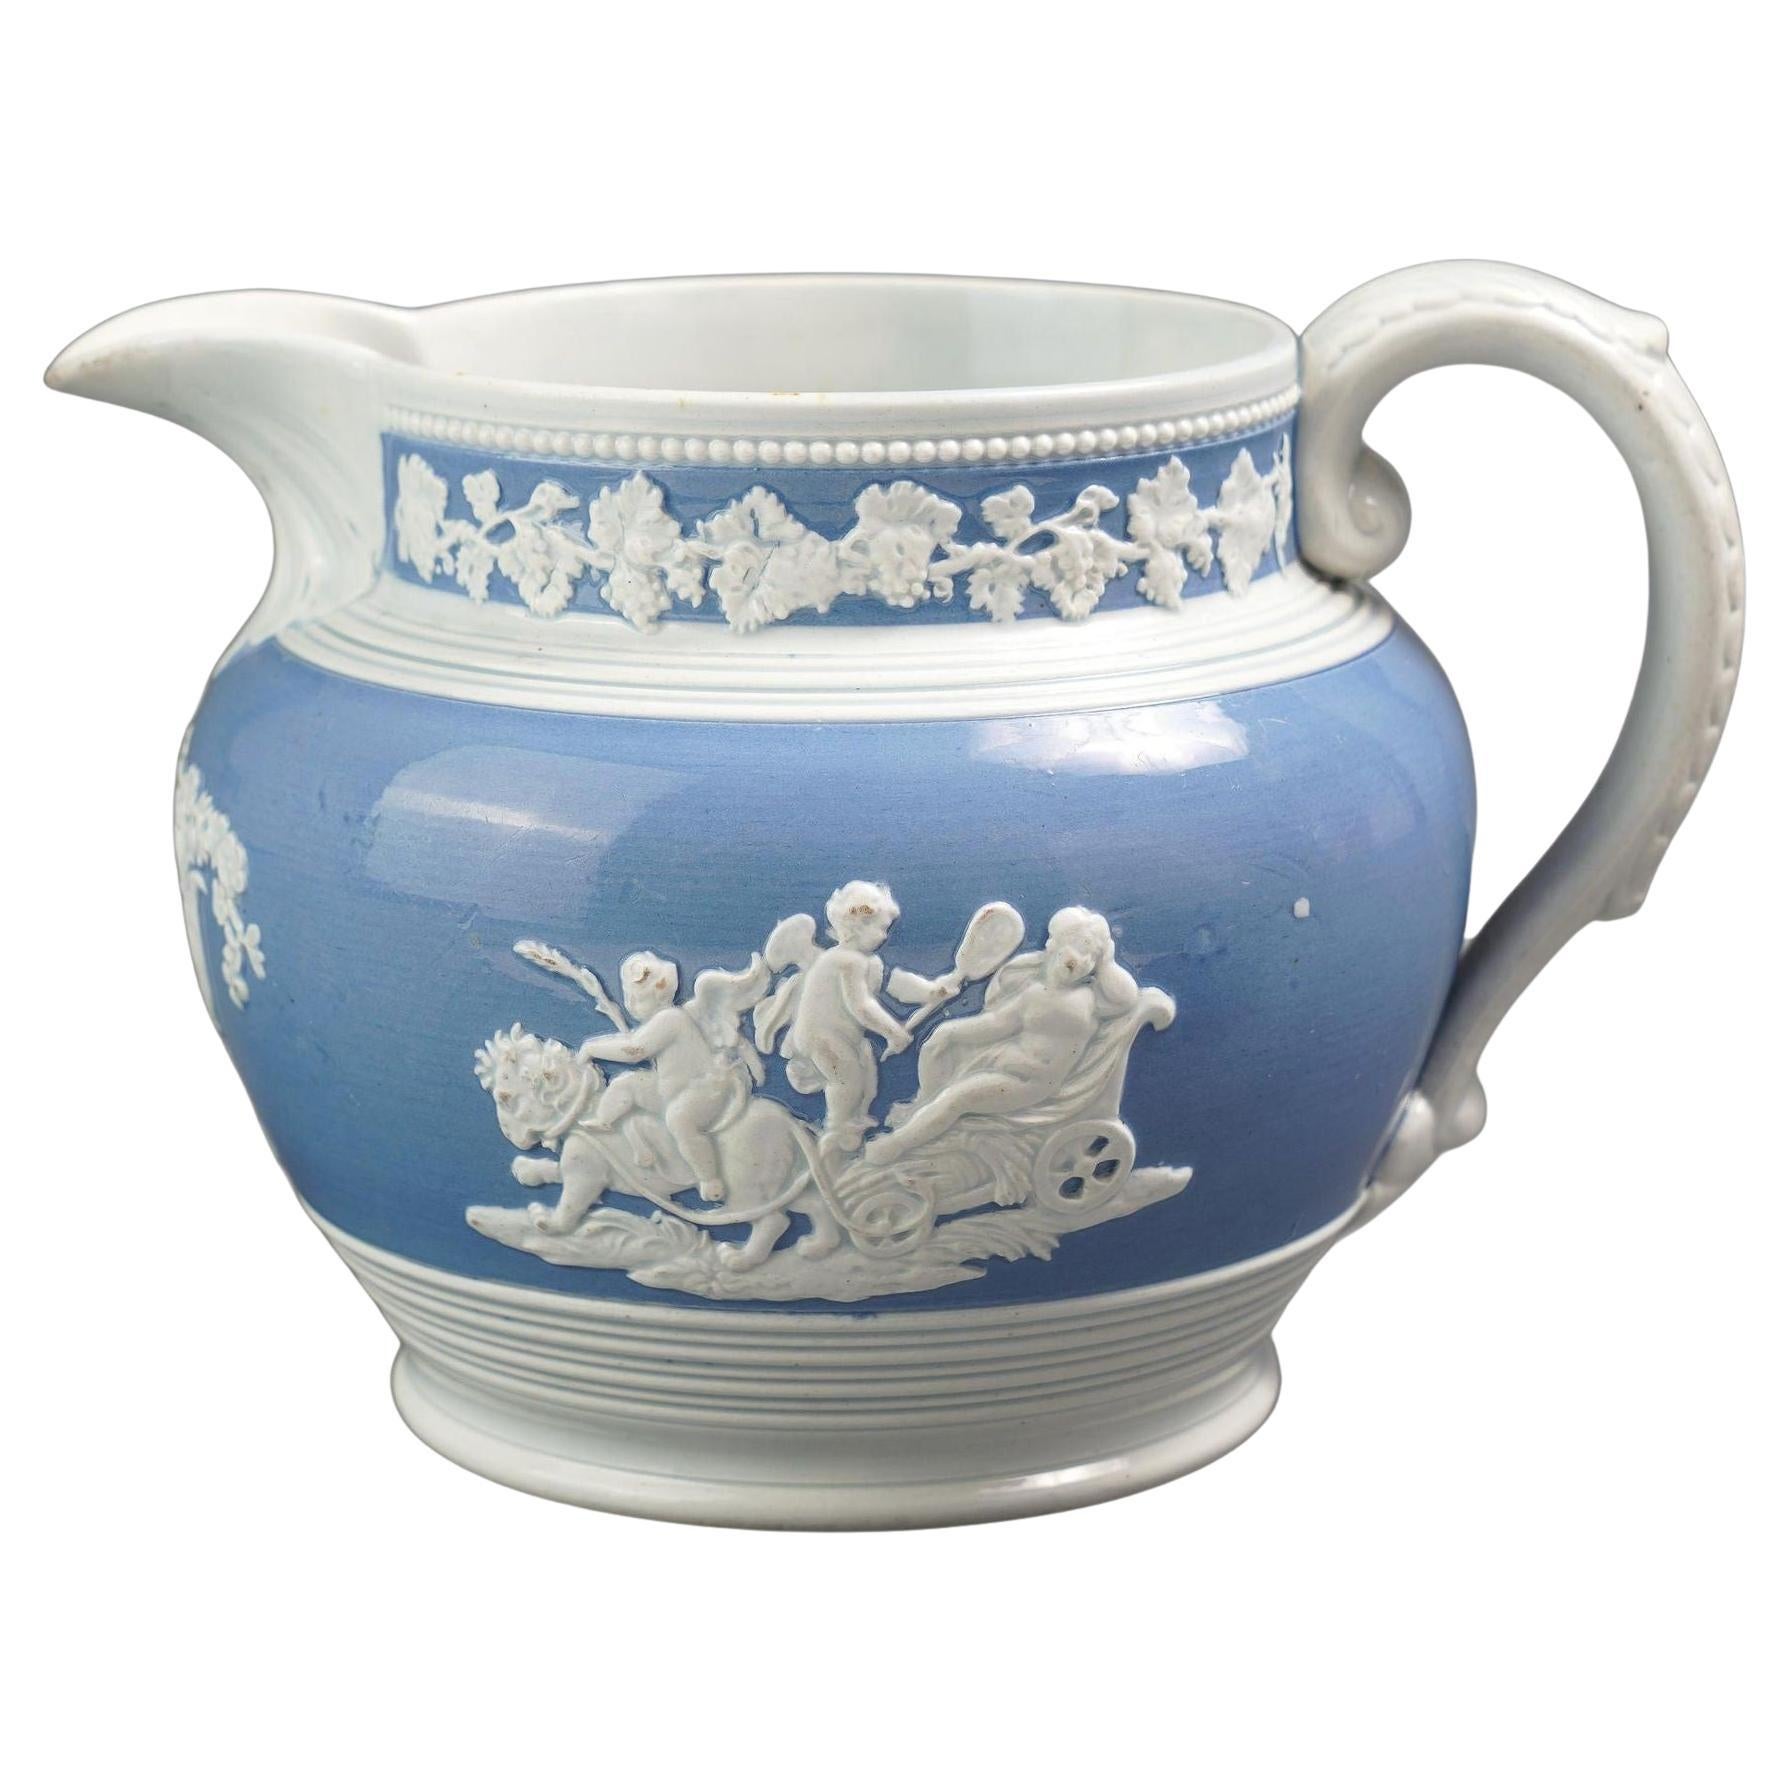 English Staffordshire pearlware pitcher by Chetham & Woolley, 1820-30 For Sale